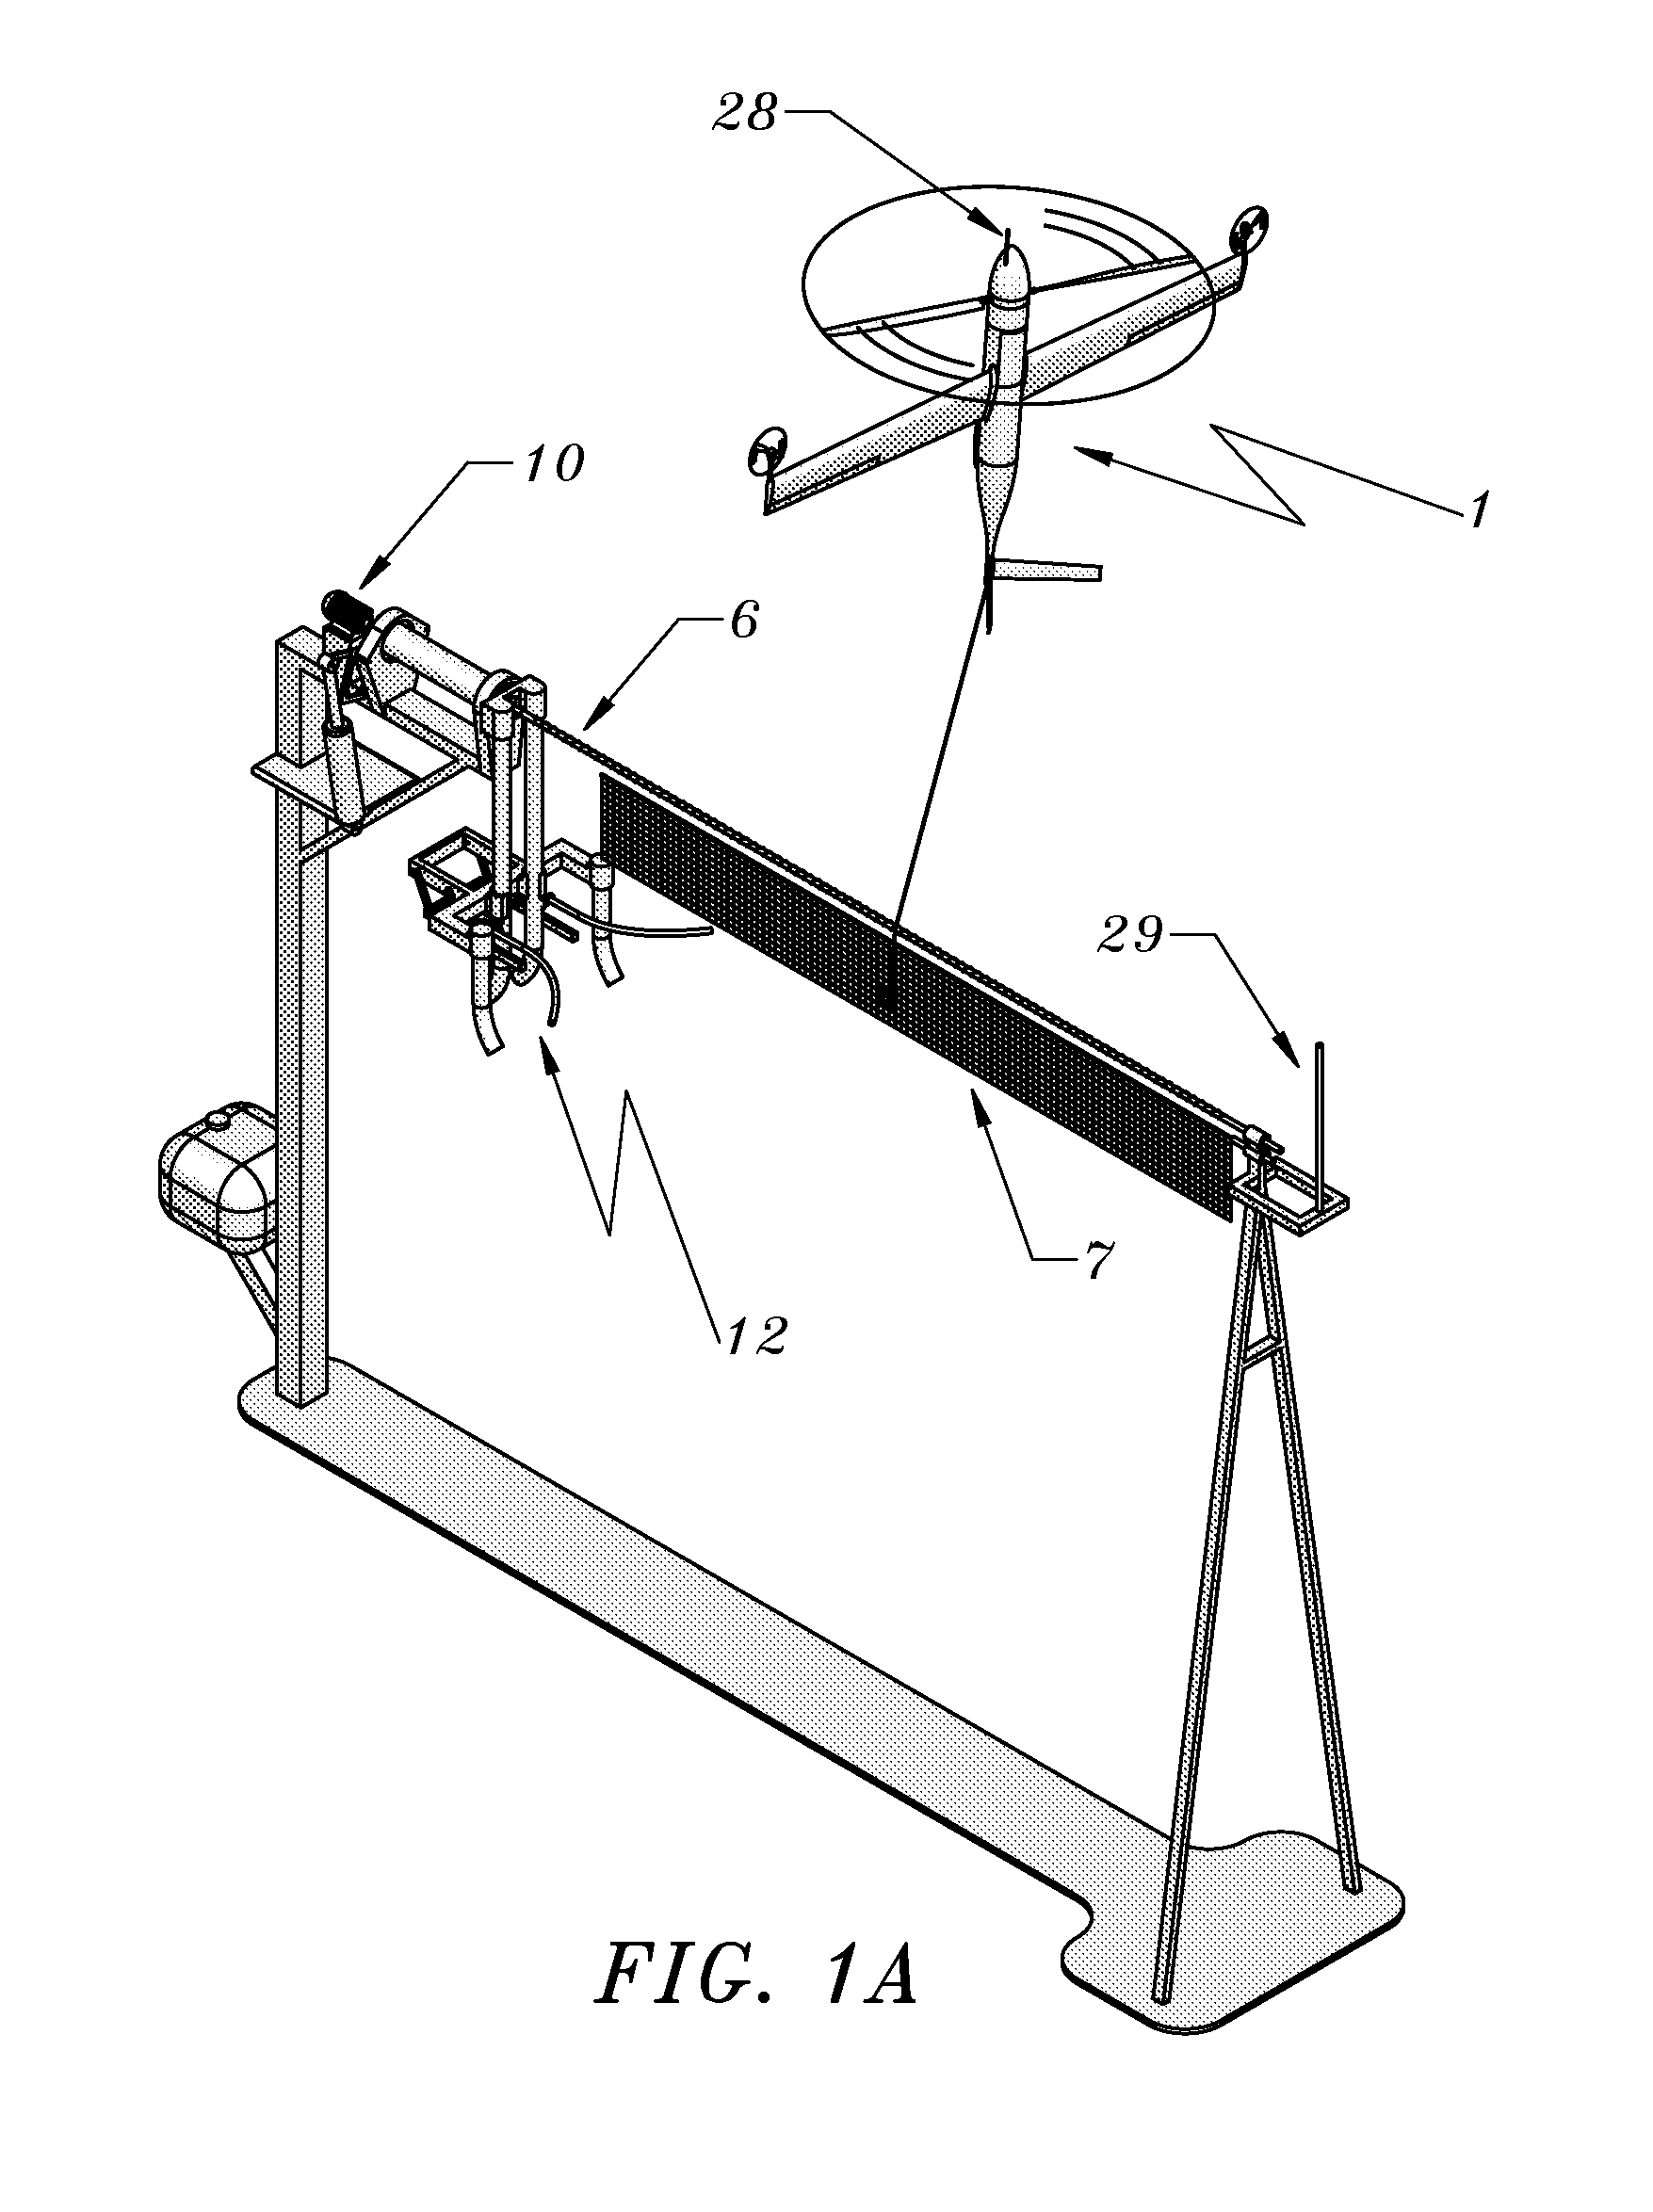 Method and apparatus for automated launch, retrieval, and servicing of a hovering aircraft